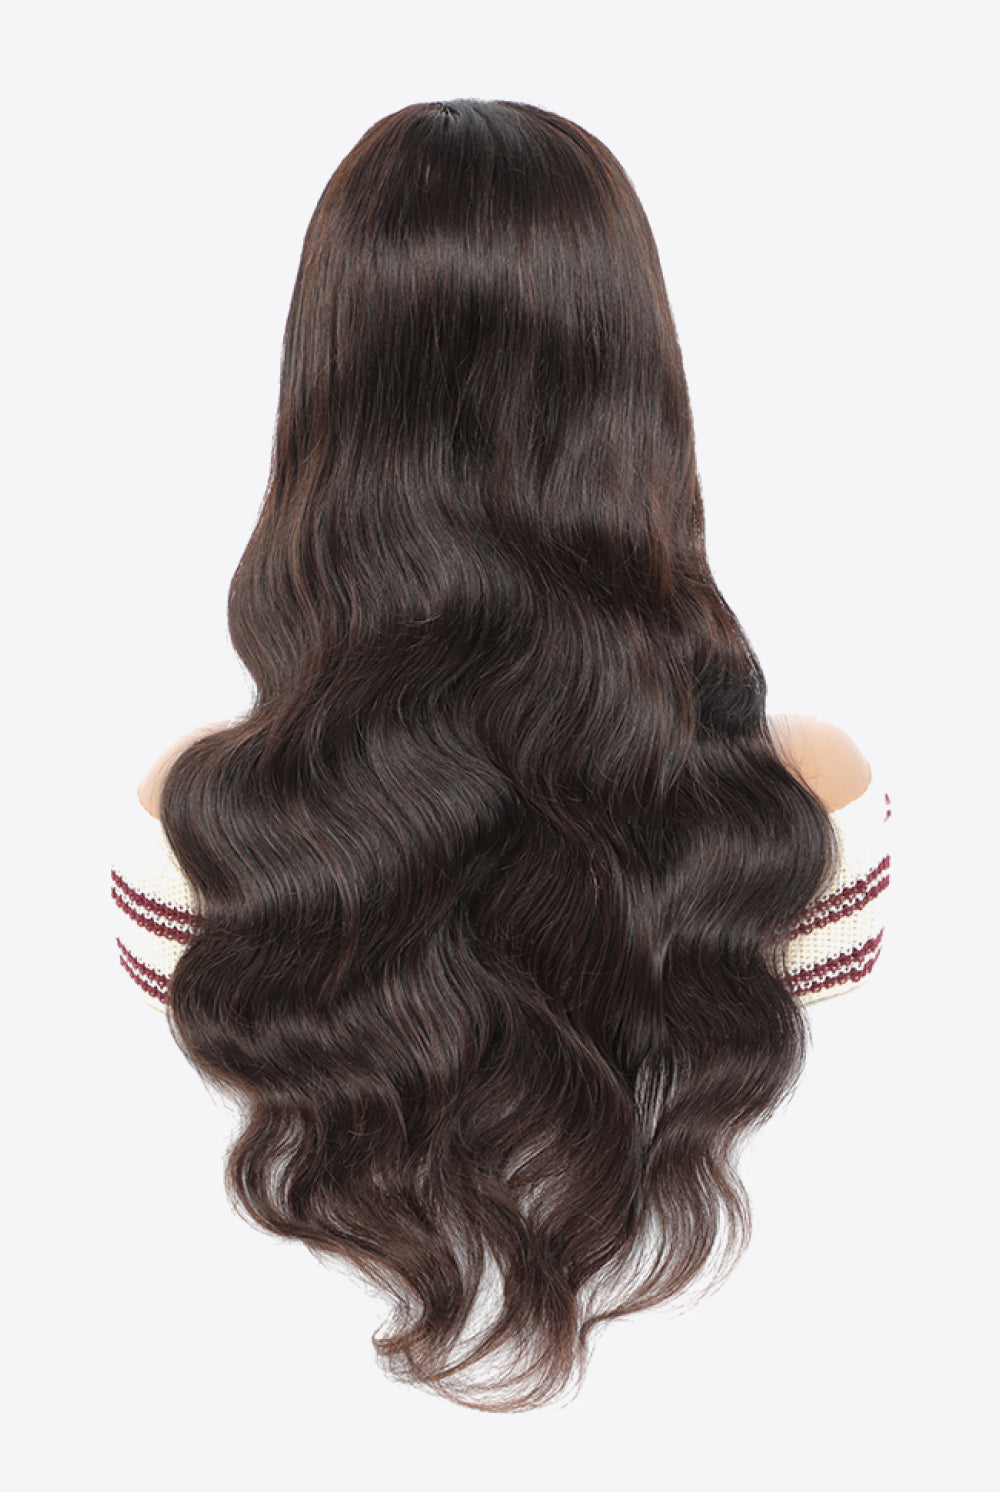 20" 13x4 Lace Front Wigs Body Wave Human Virgin Hair Natural Color 150% Density - GemThreads Boutique 20" 13x4 Lace Front Wigs Body Wave Human Virgin Hair Natural Color 150% Density